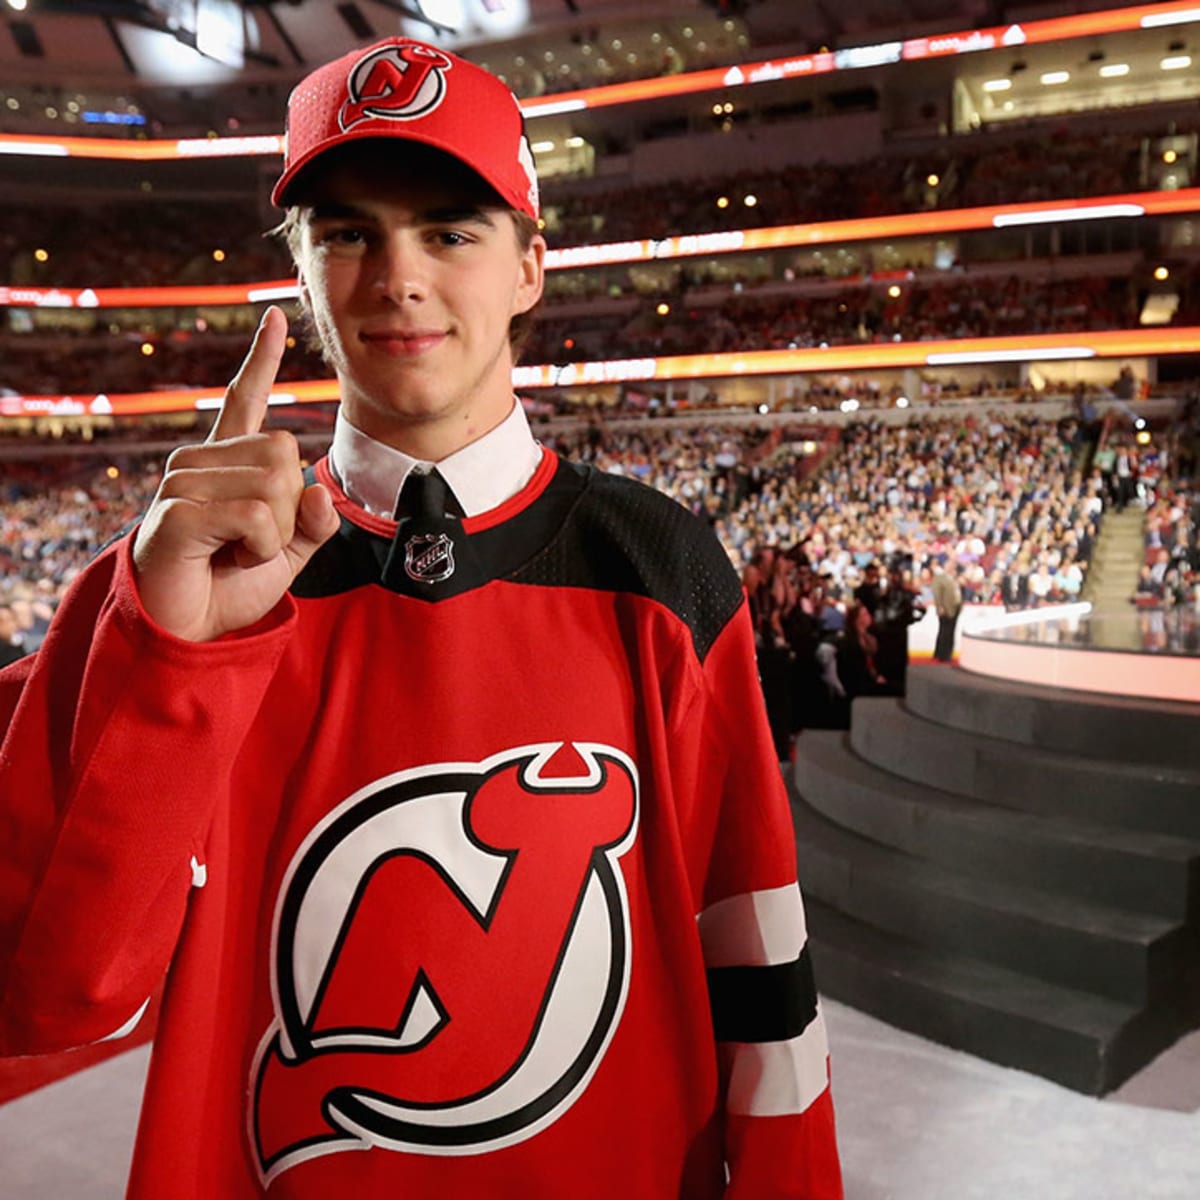 Nico Hischier, Devils' 1st Overall Draft Pick, Welcomed by Newark,  Introduced at Press Conference